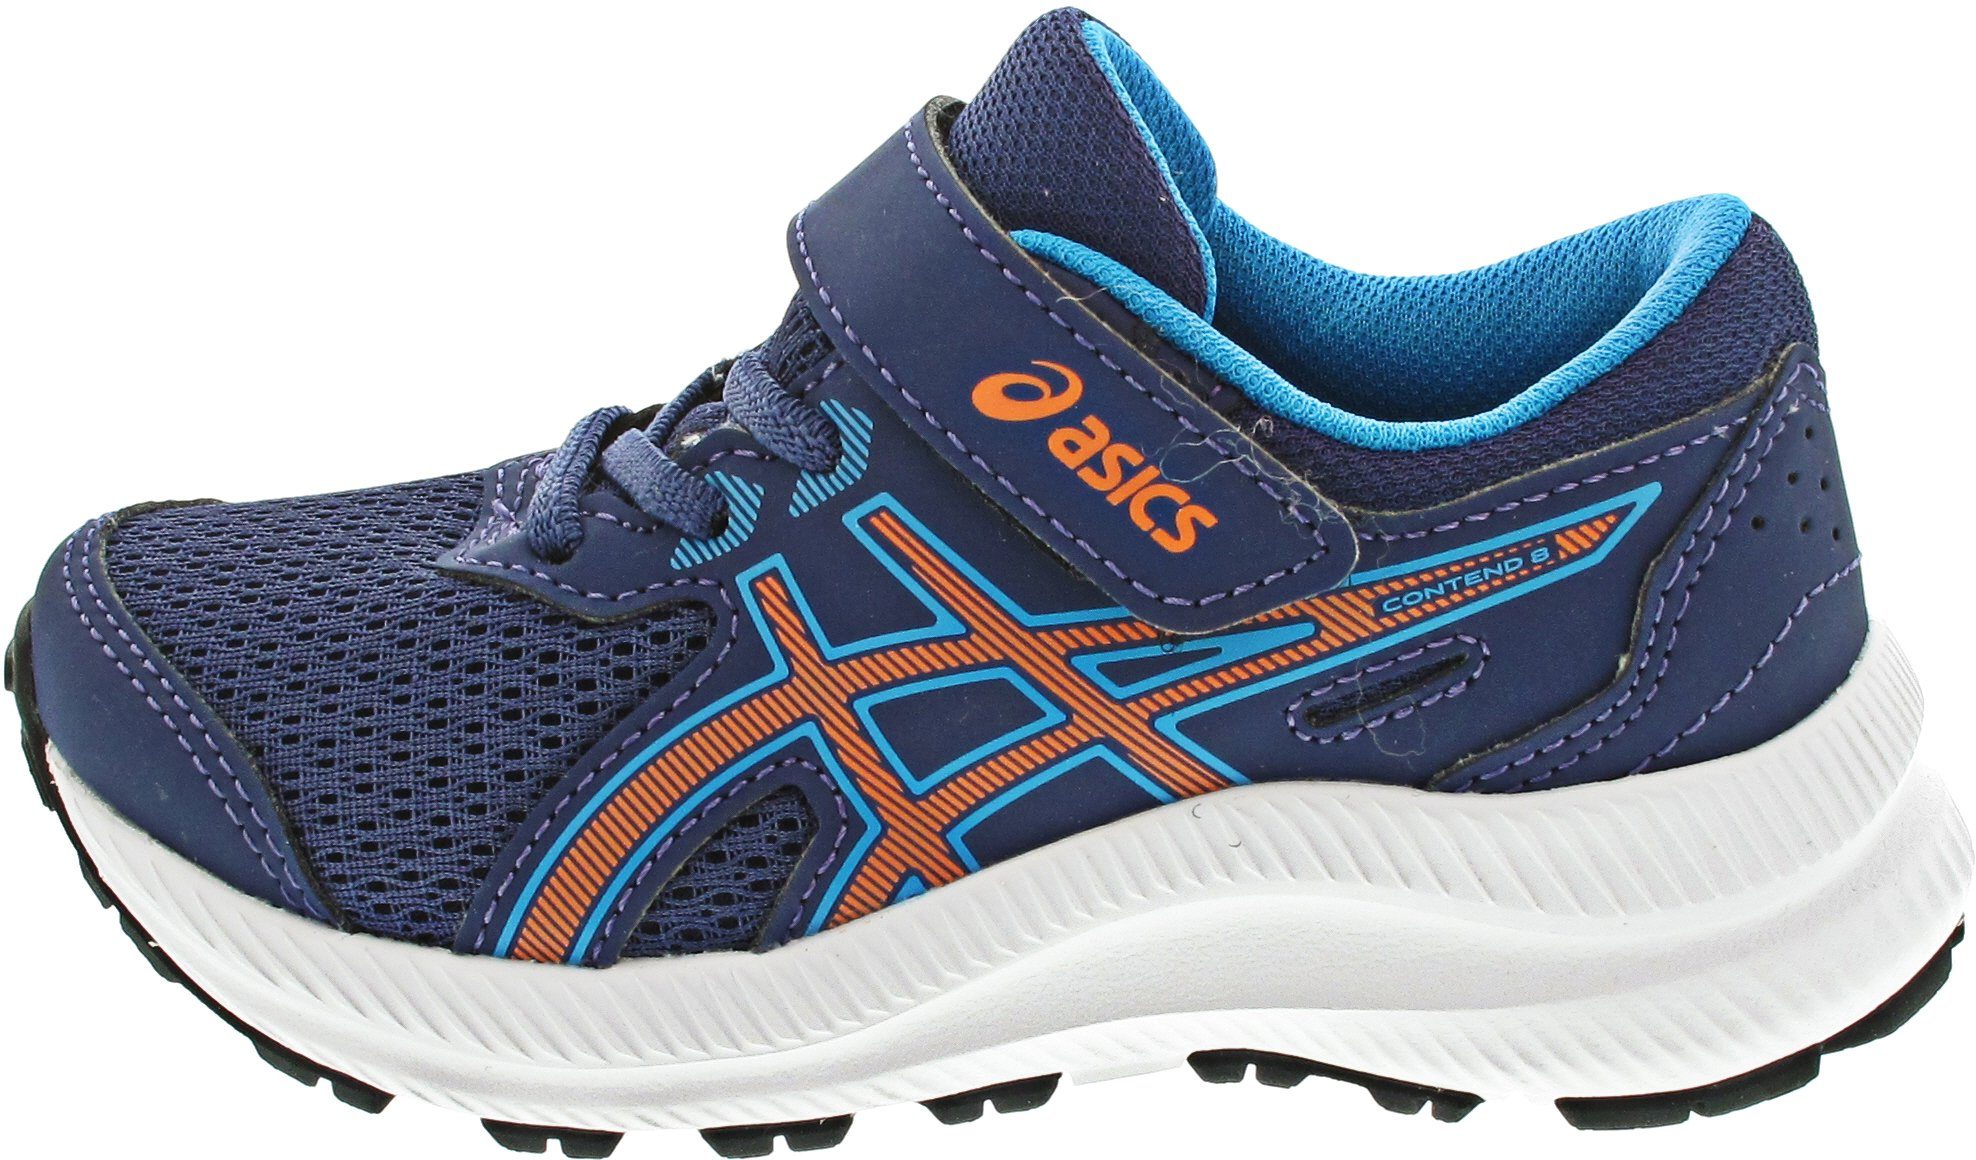 PS Sneaker 8 Contend Asics